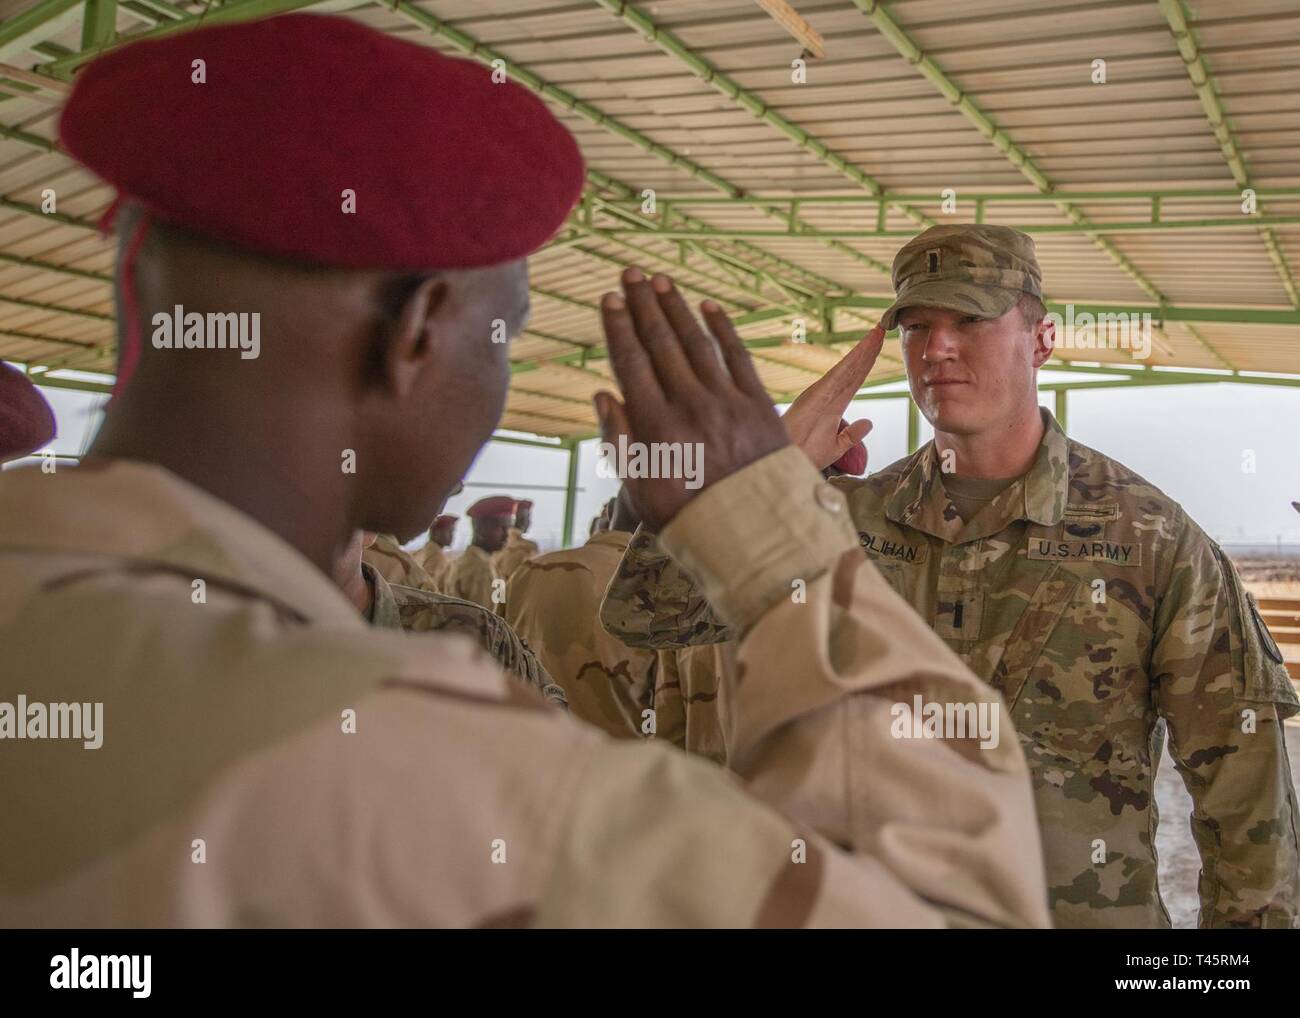 U.S. Army 1st Lt. Travis Holihan, the officer in charge of NCO training, Headquarters Company, 1-26 Infantry Battalion, 2nd Brigade Combat Team, 101st Airborne, assigned to Combined Joint Task Force-Horn of Africa, returns a salute during an NCO course graduation for the Rapid Intervention Battalion (RIB), a Djiboutian army elite military force, at a training location near Djibouti, March 7, 2019. U.S. Soldiers with Holihan’s unit taught the course to the RIB soldiers. Stock Photo